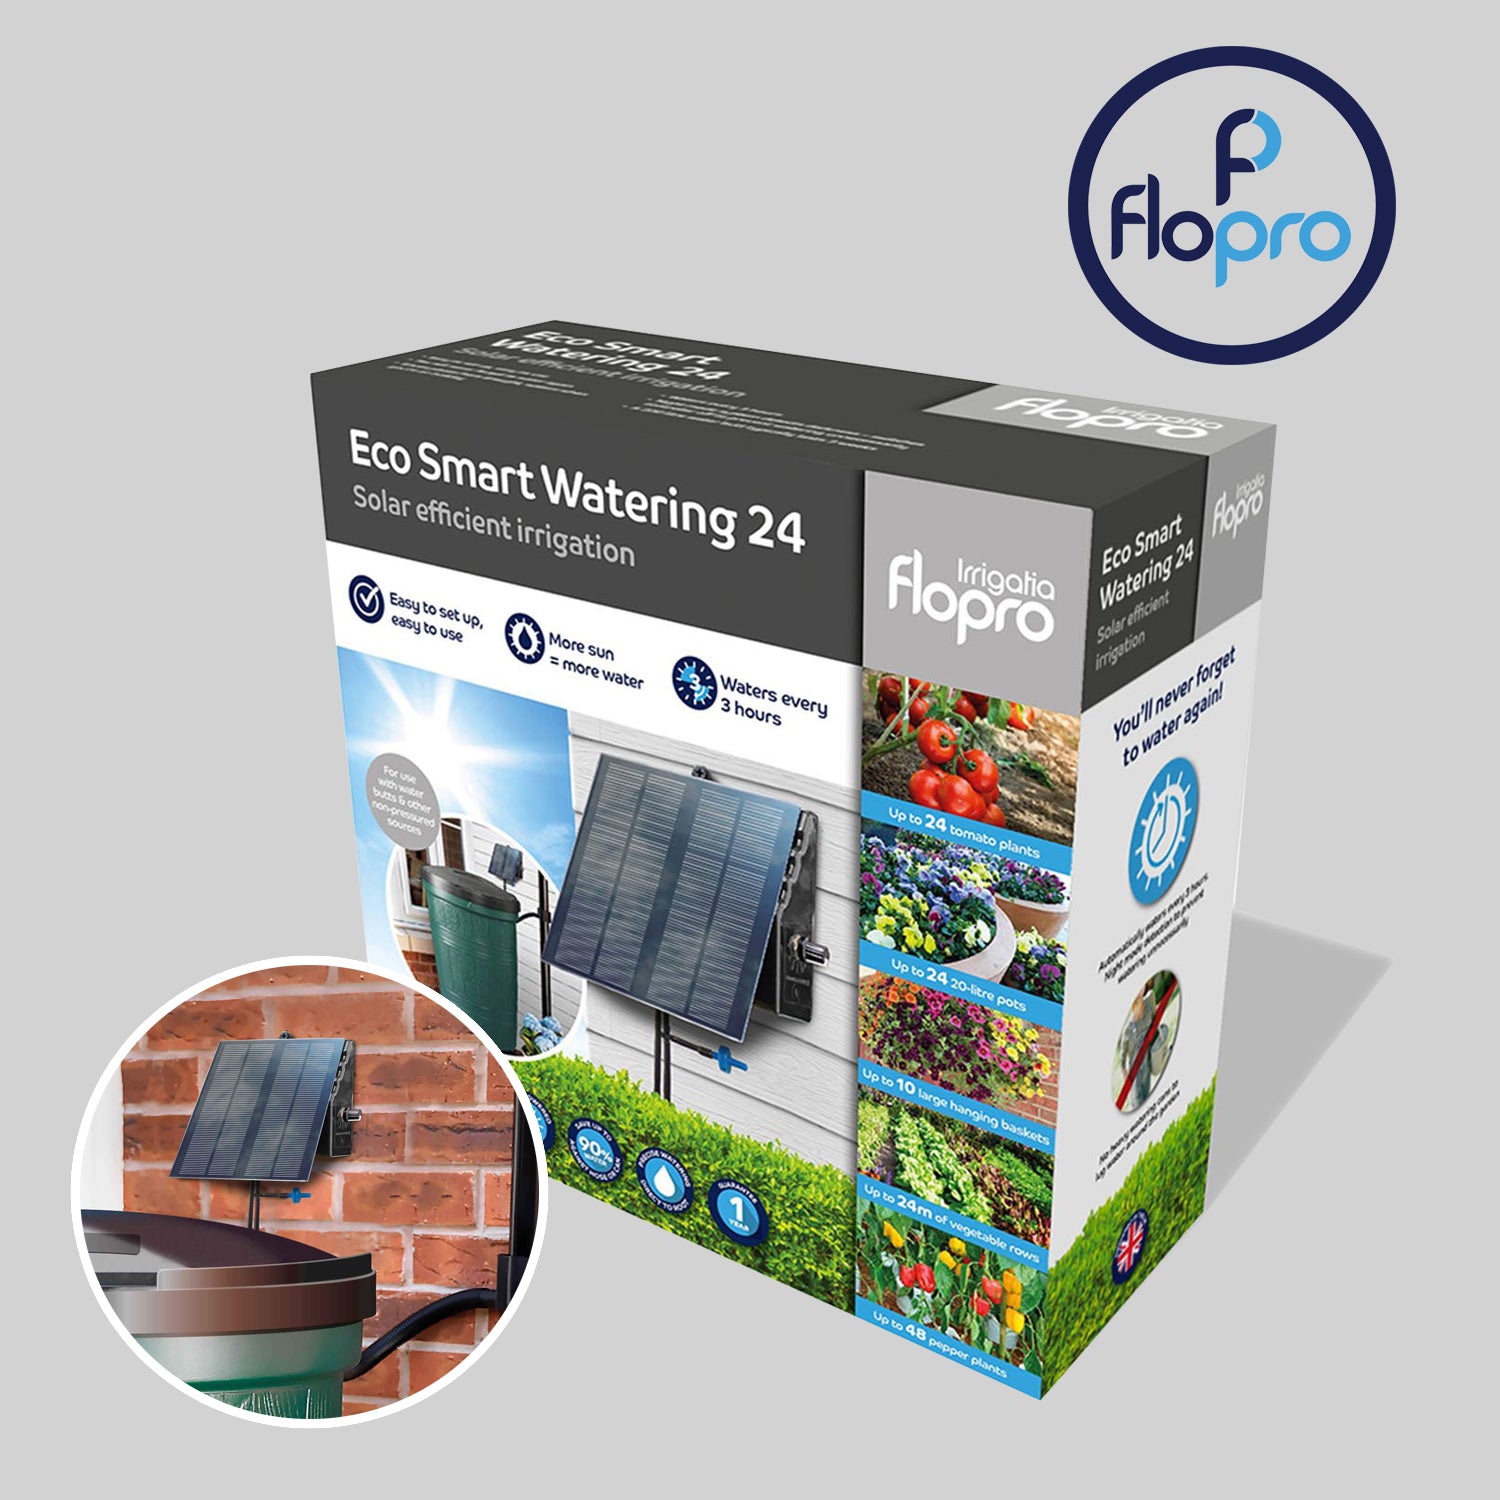 Irrigatia Eco Smart Watering 24 by Flopro, sold by In-Excess